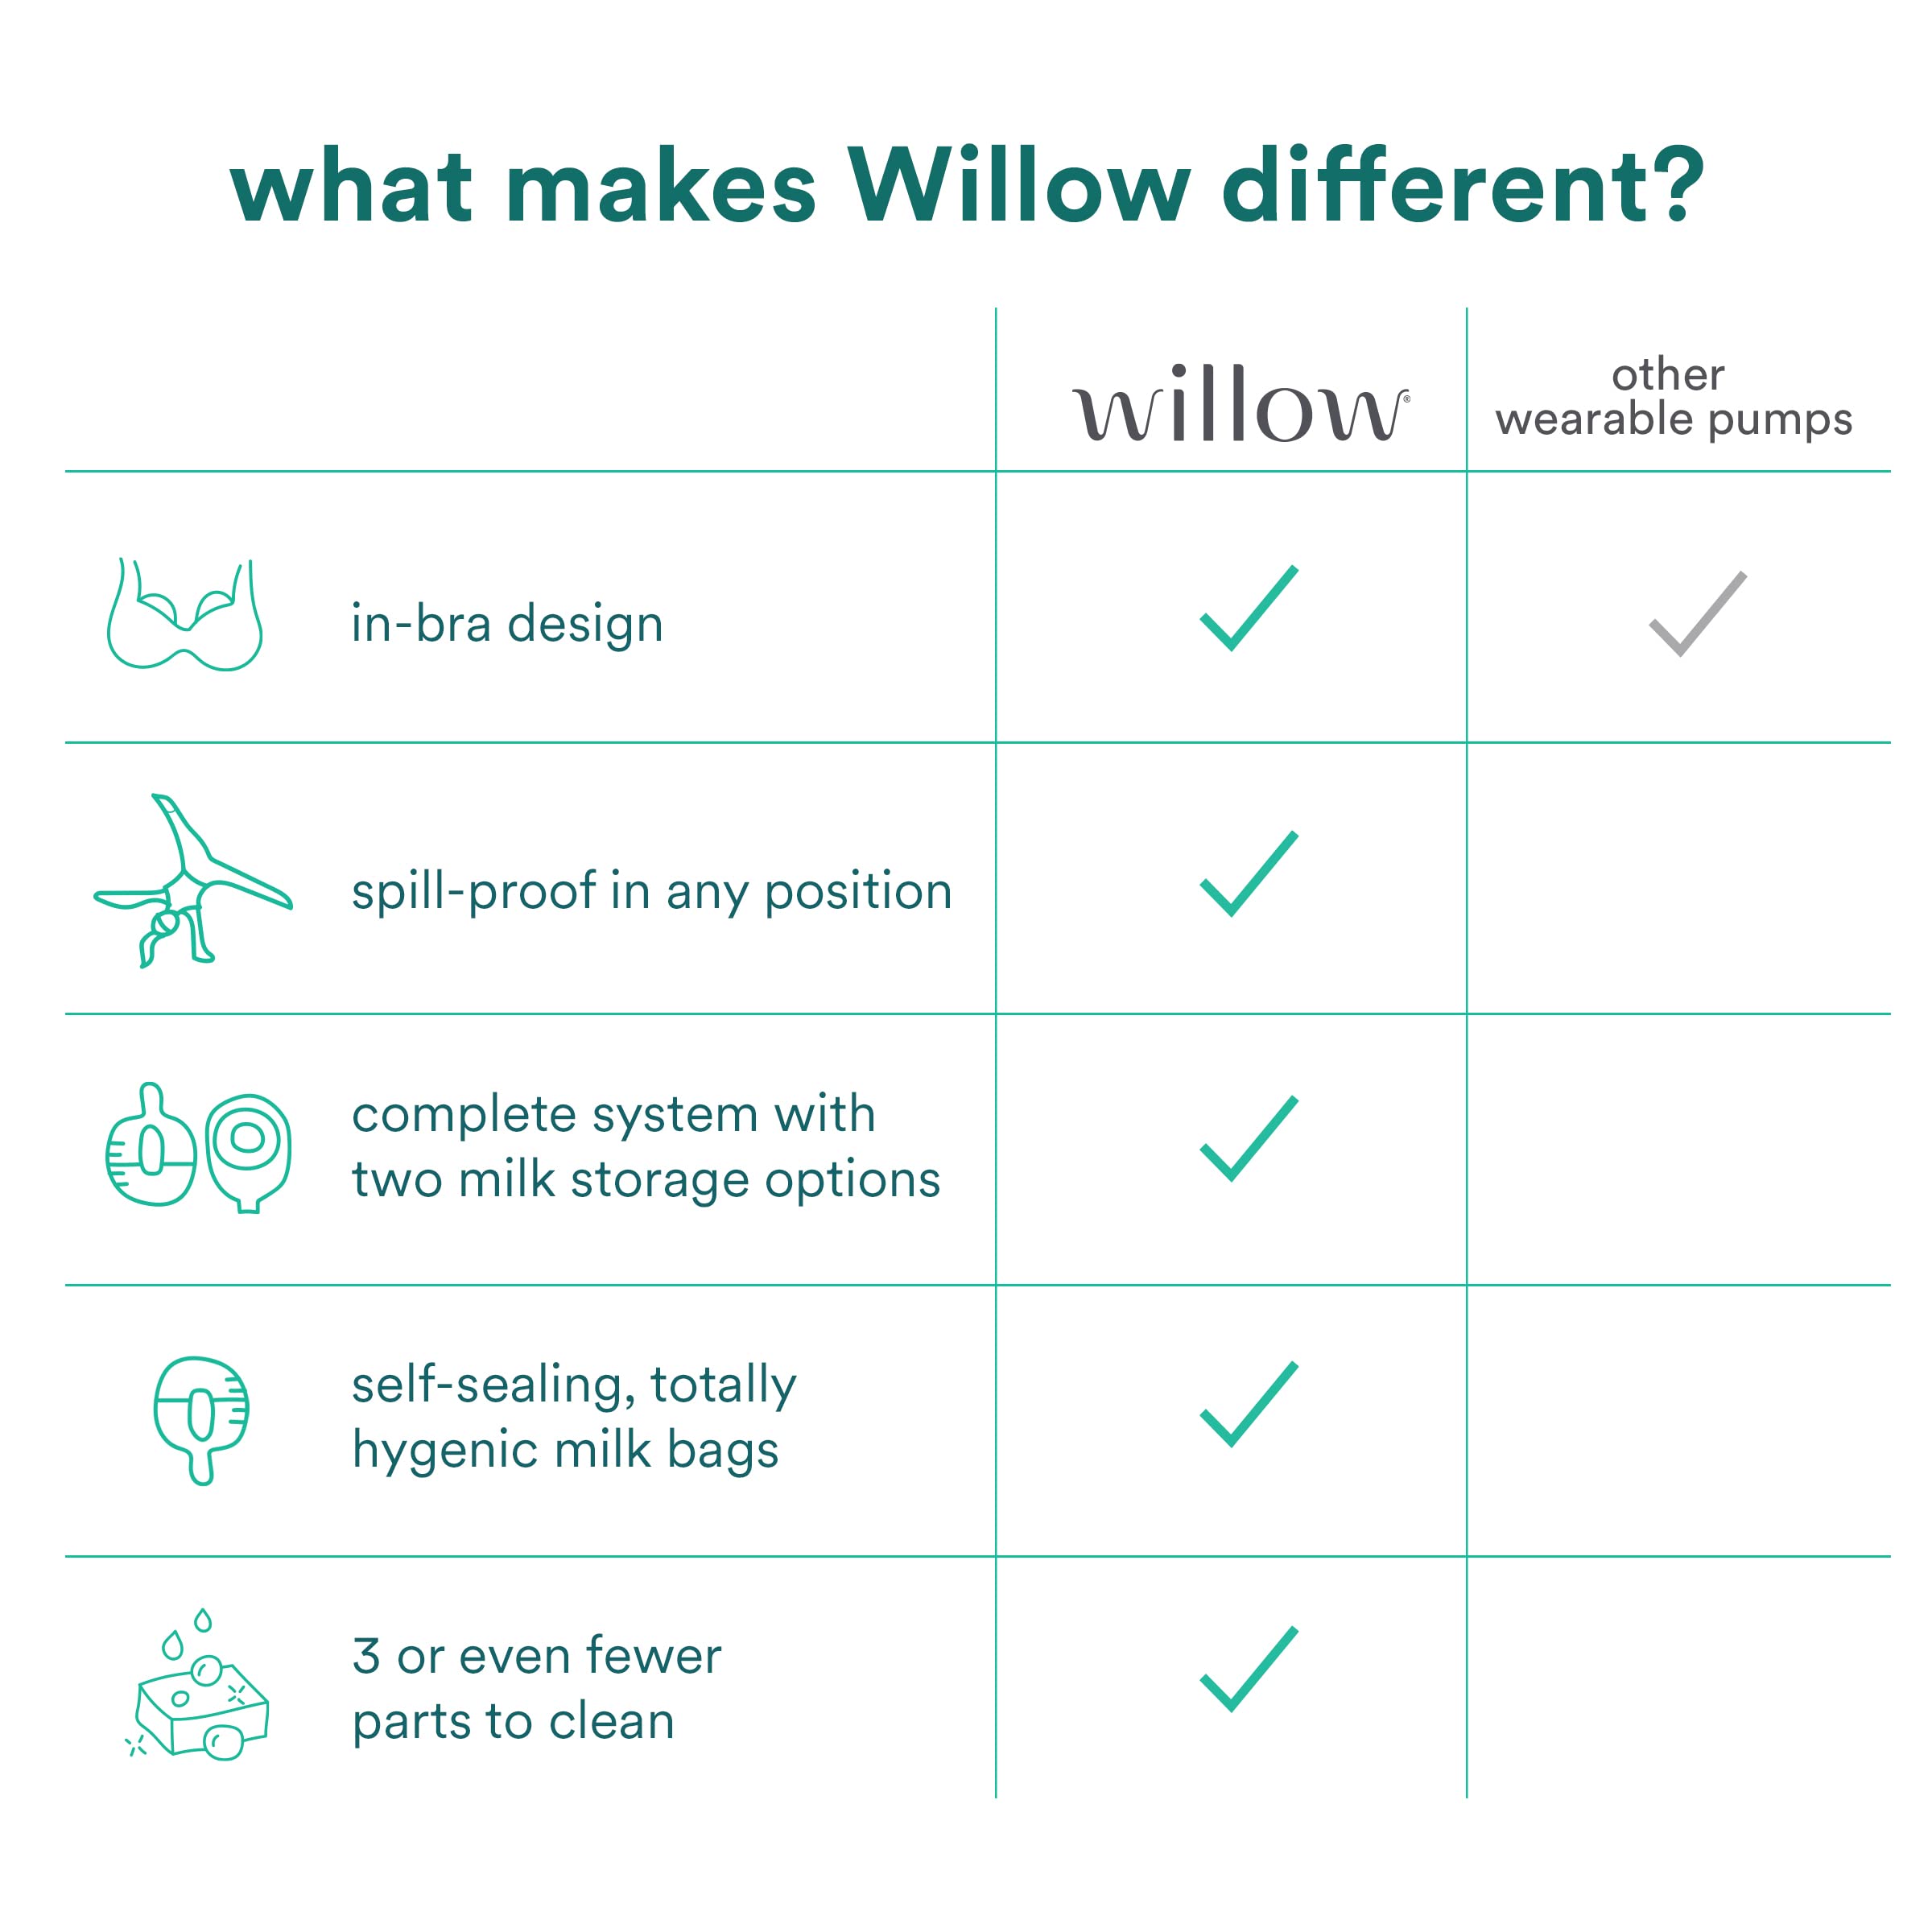 Willow Pump Spill-Proof Breast Milk Bags, 48 Count | Holds 4 oz. Per Bag | Self-Sealing Storage Bags, Recyclable & BPA Free | Breast Feeding Essential for The Willow Pump